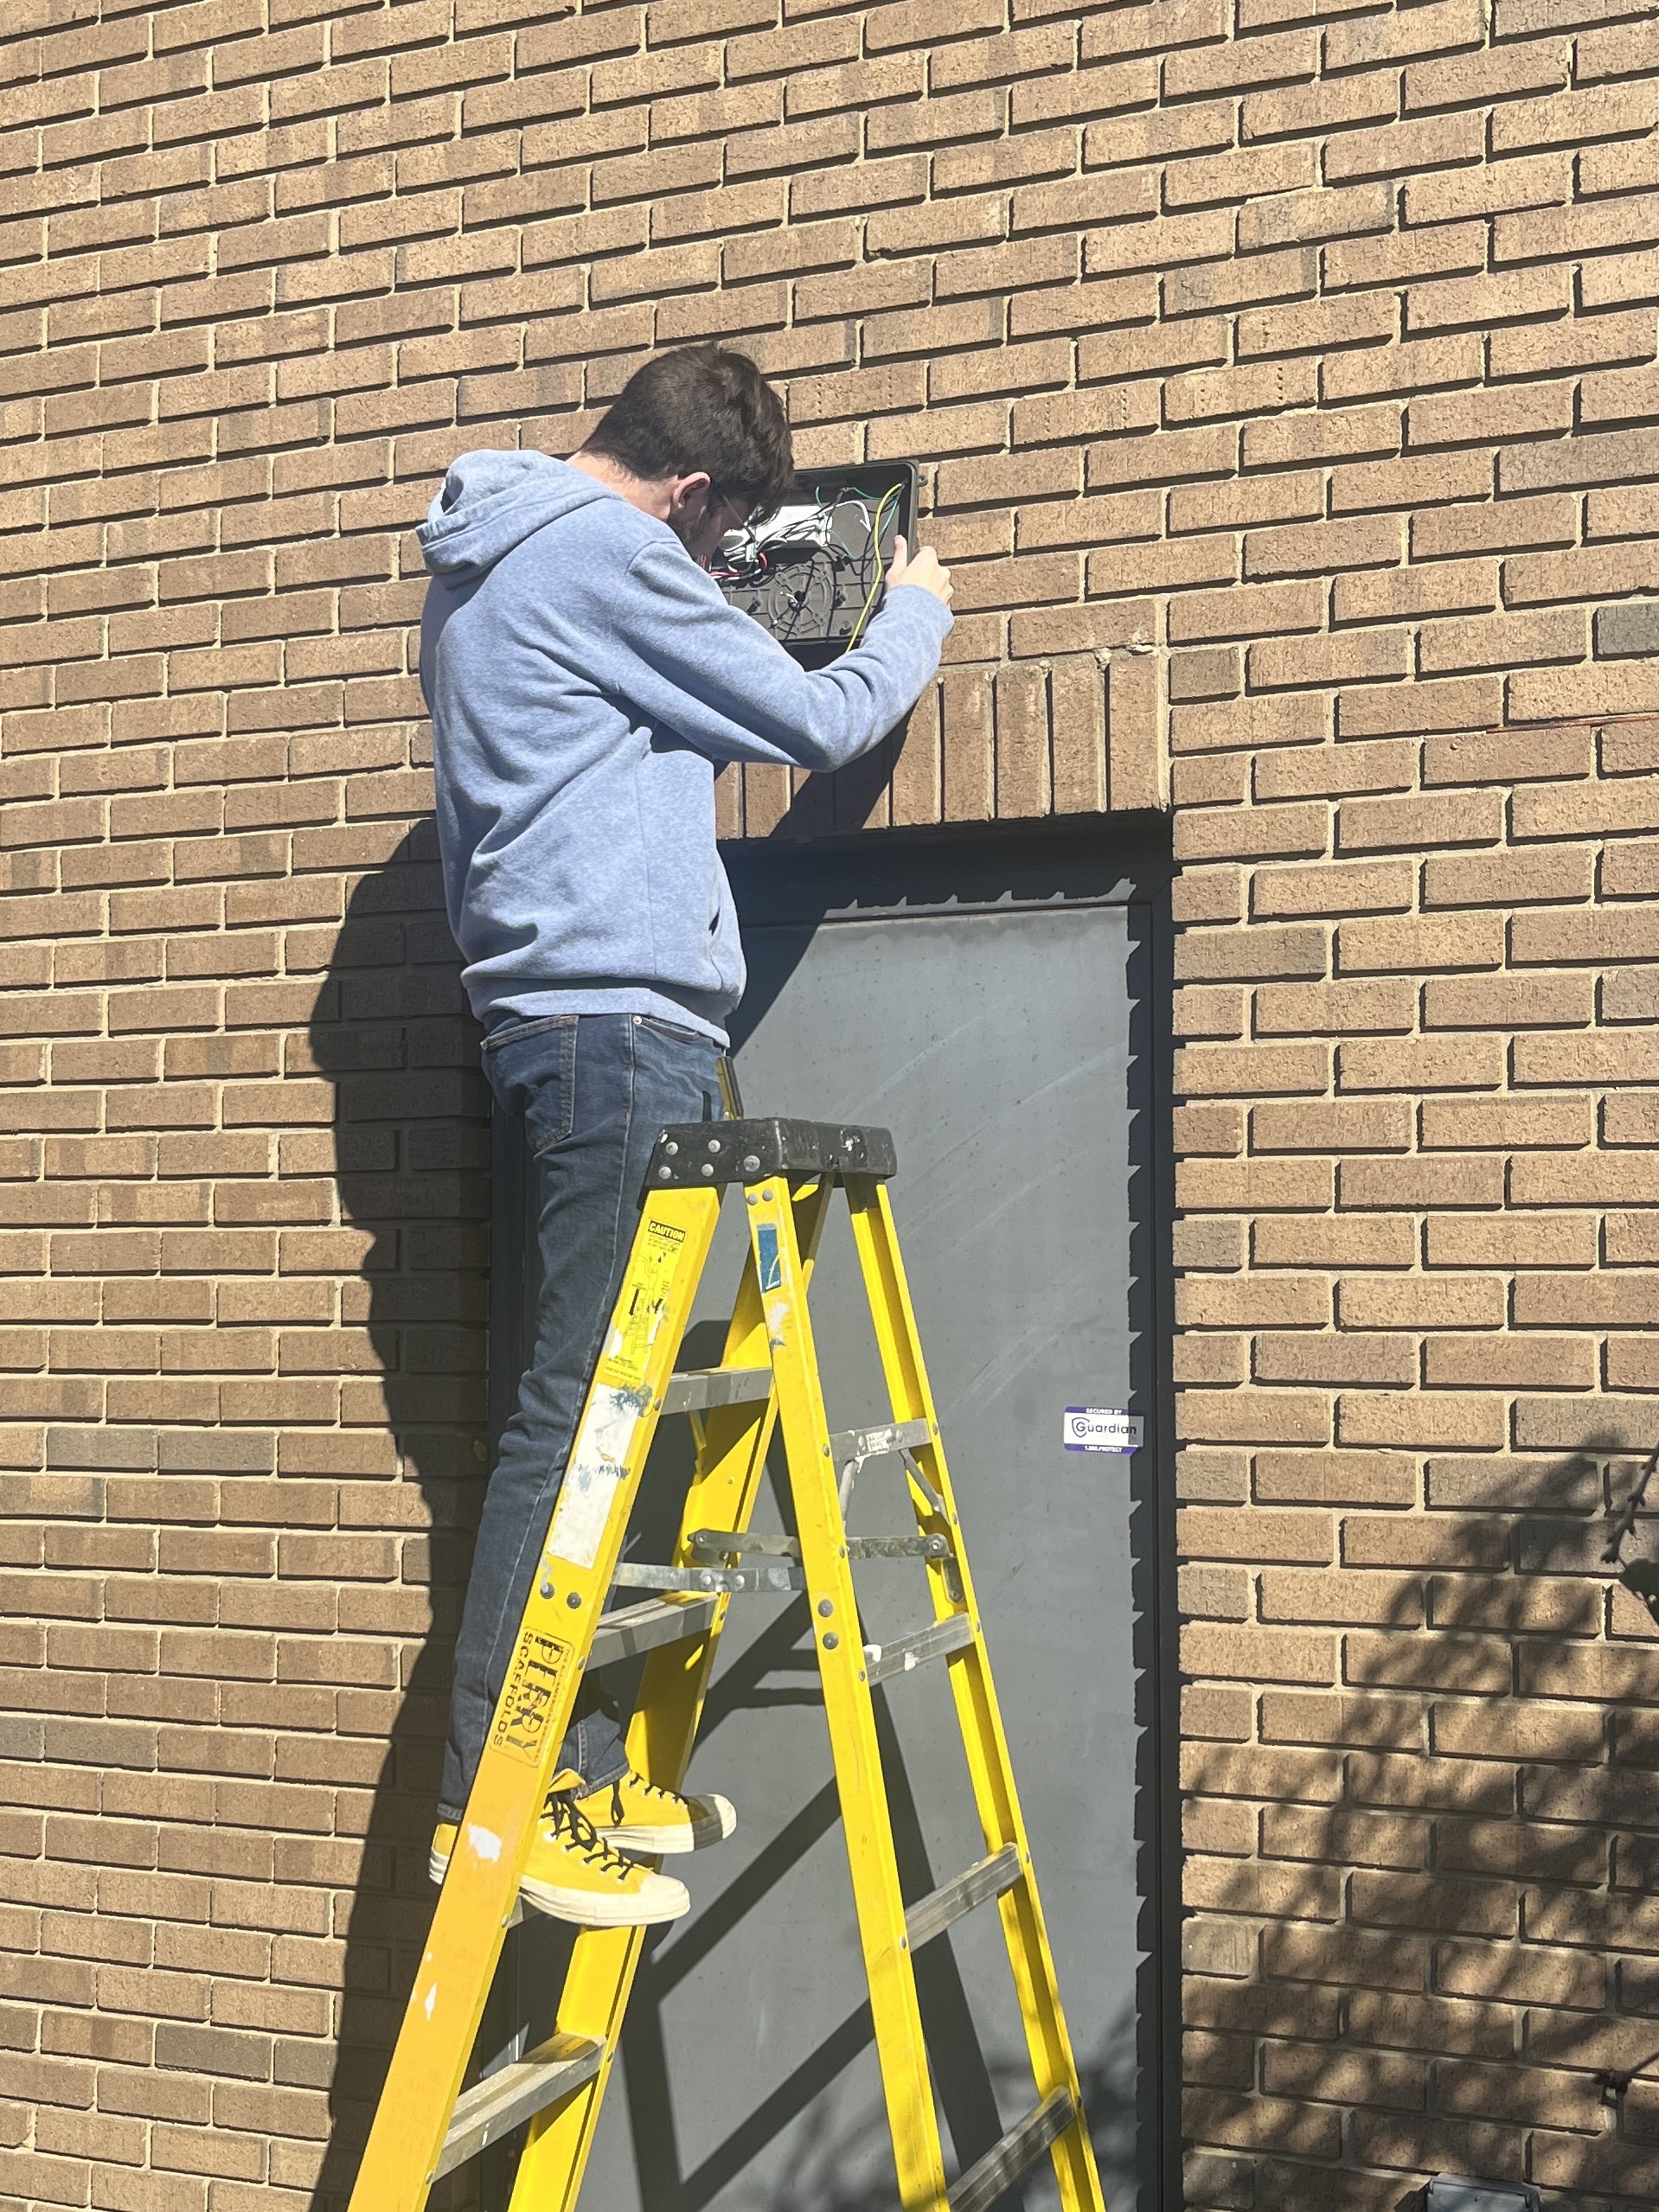 Nathan Installs Front Security Light